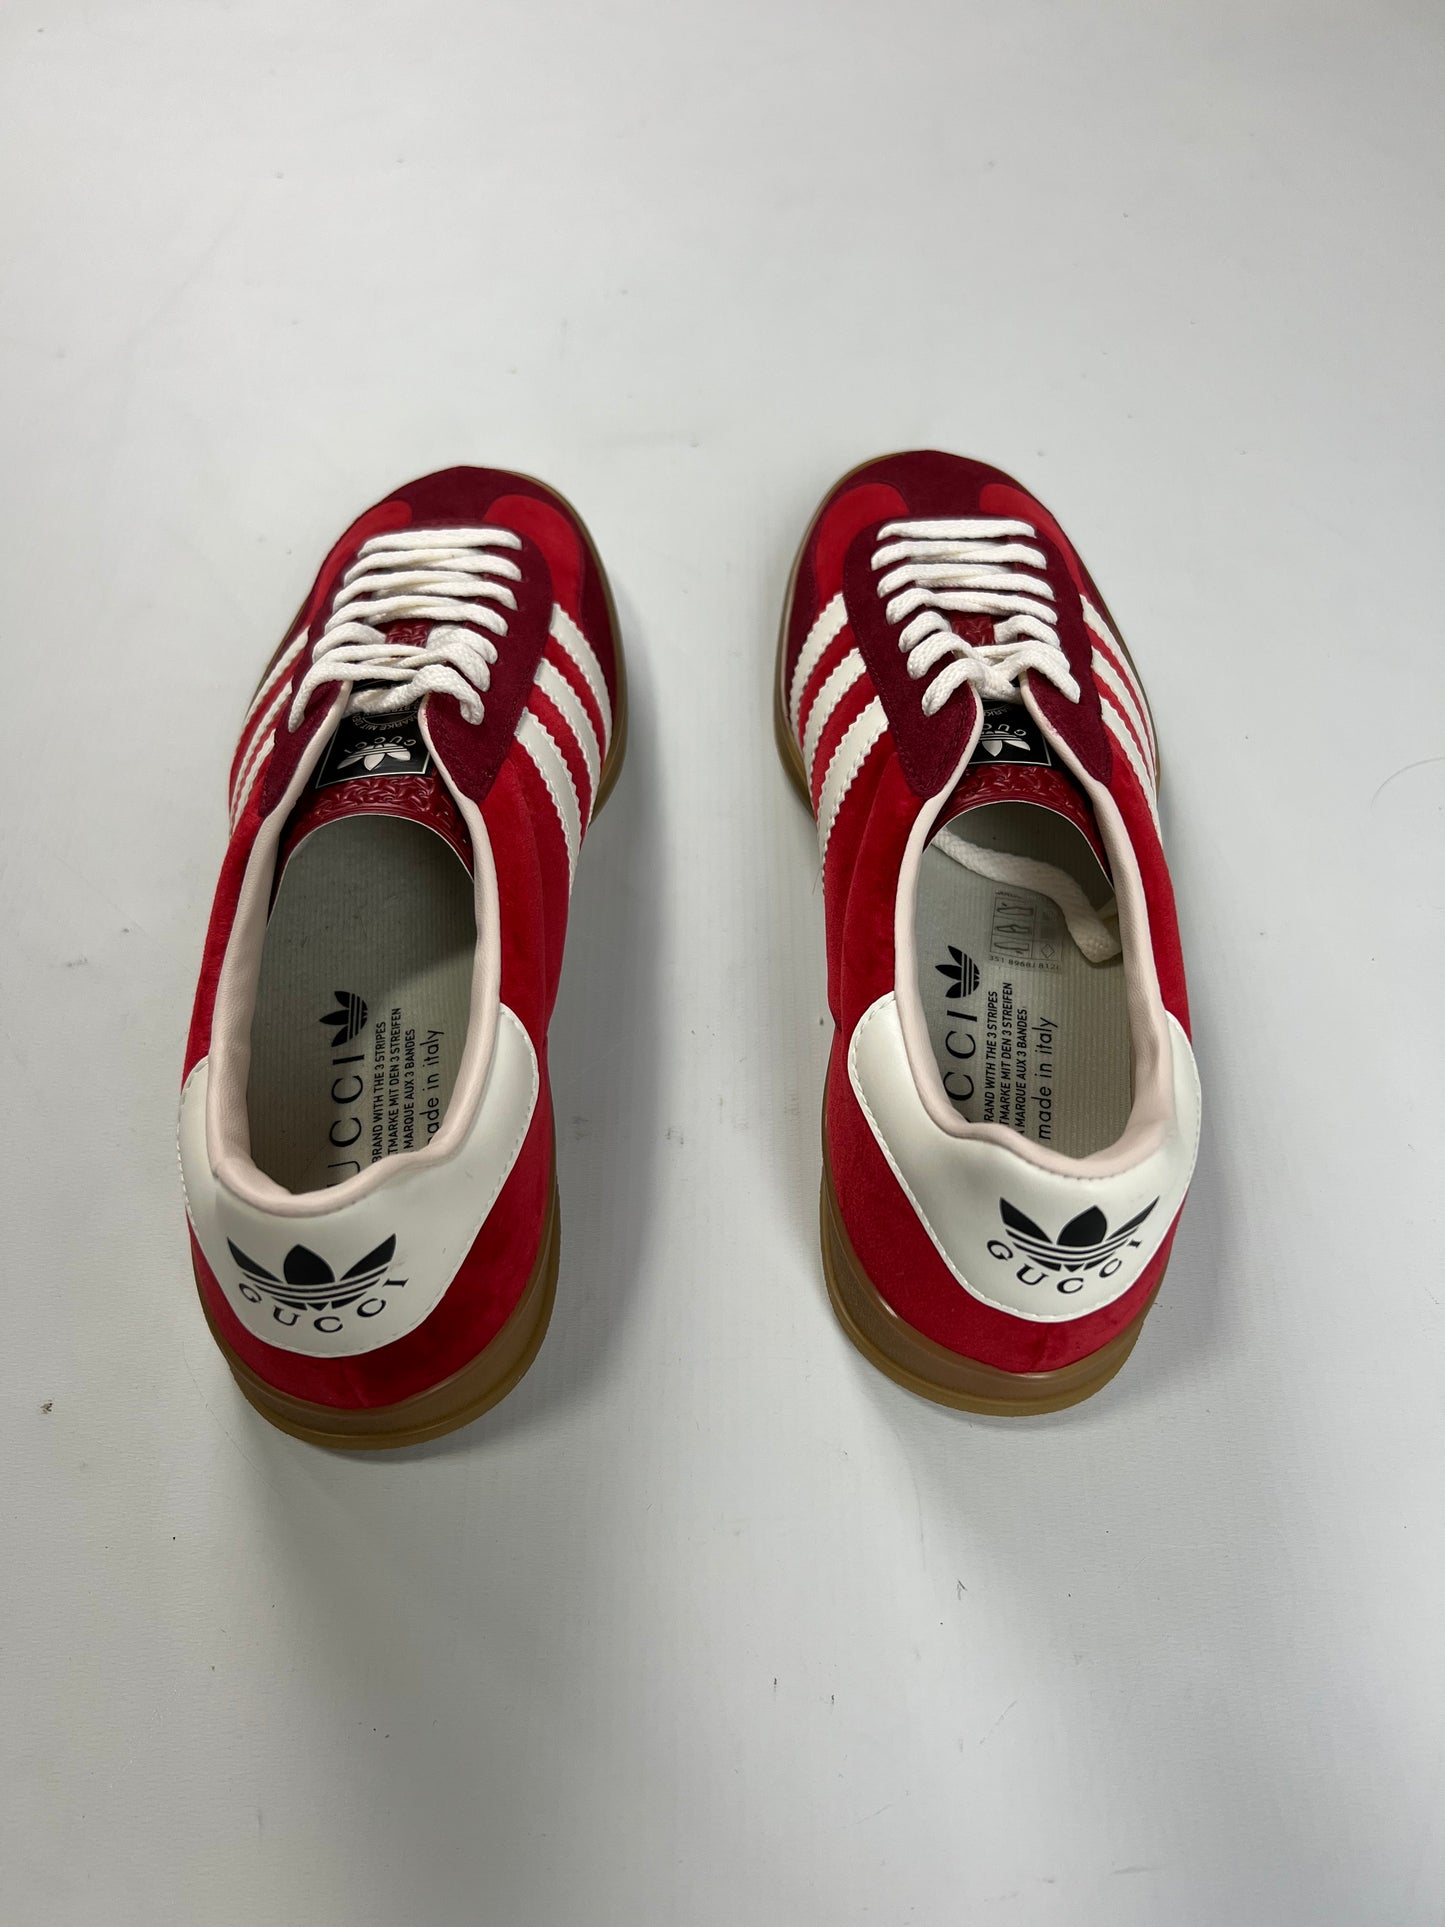 Gucci x Adidas Gazelle sneakers in velour red SZ:8|10|10.5